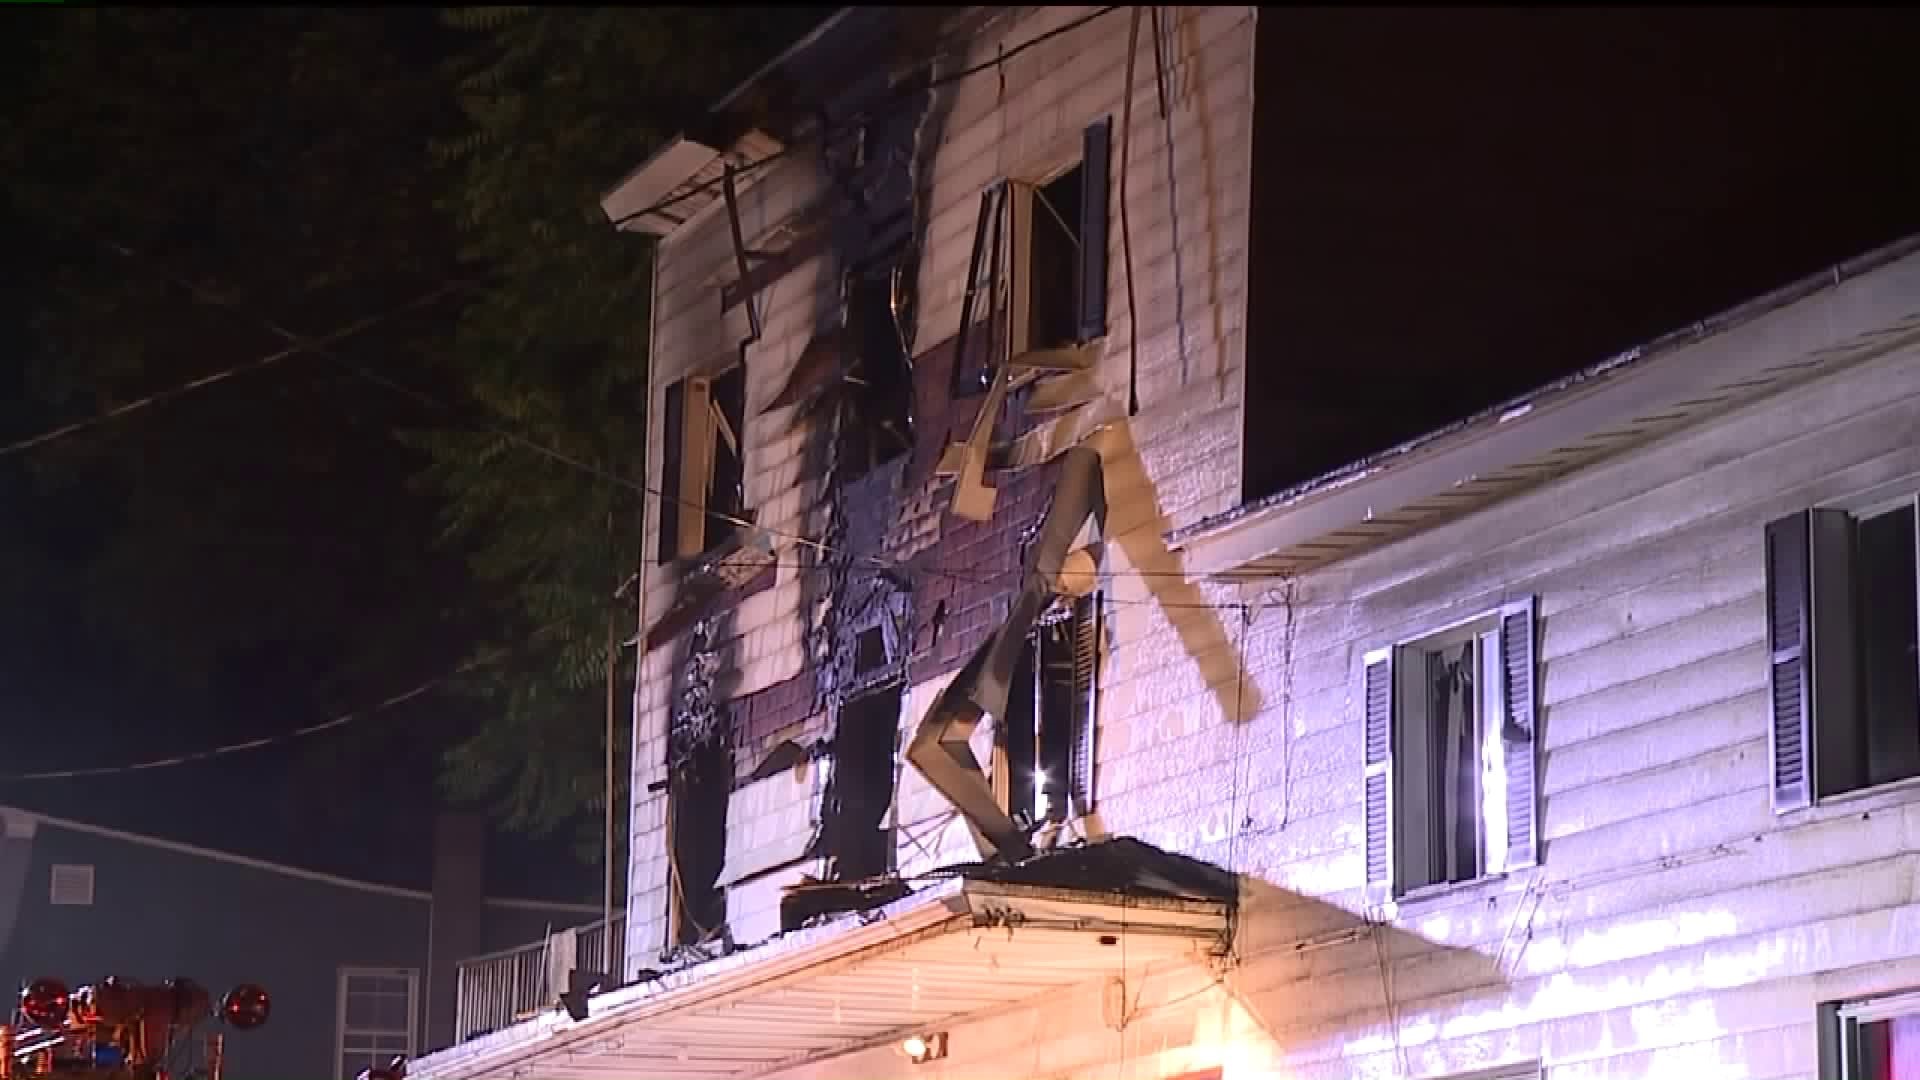 Developing Story: Three People Taken to Hospital After Fire in Schuylkill County